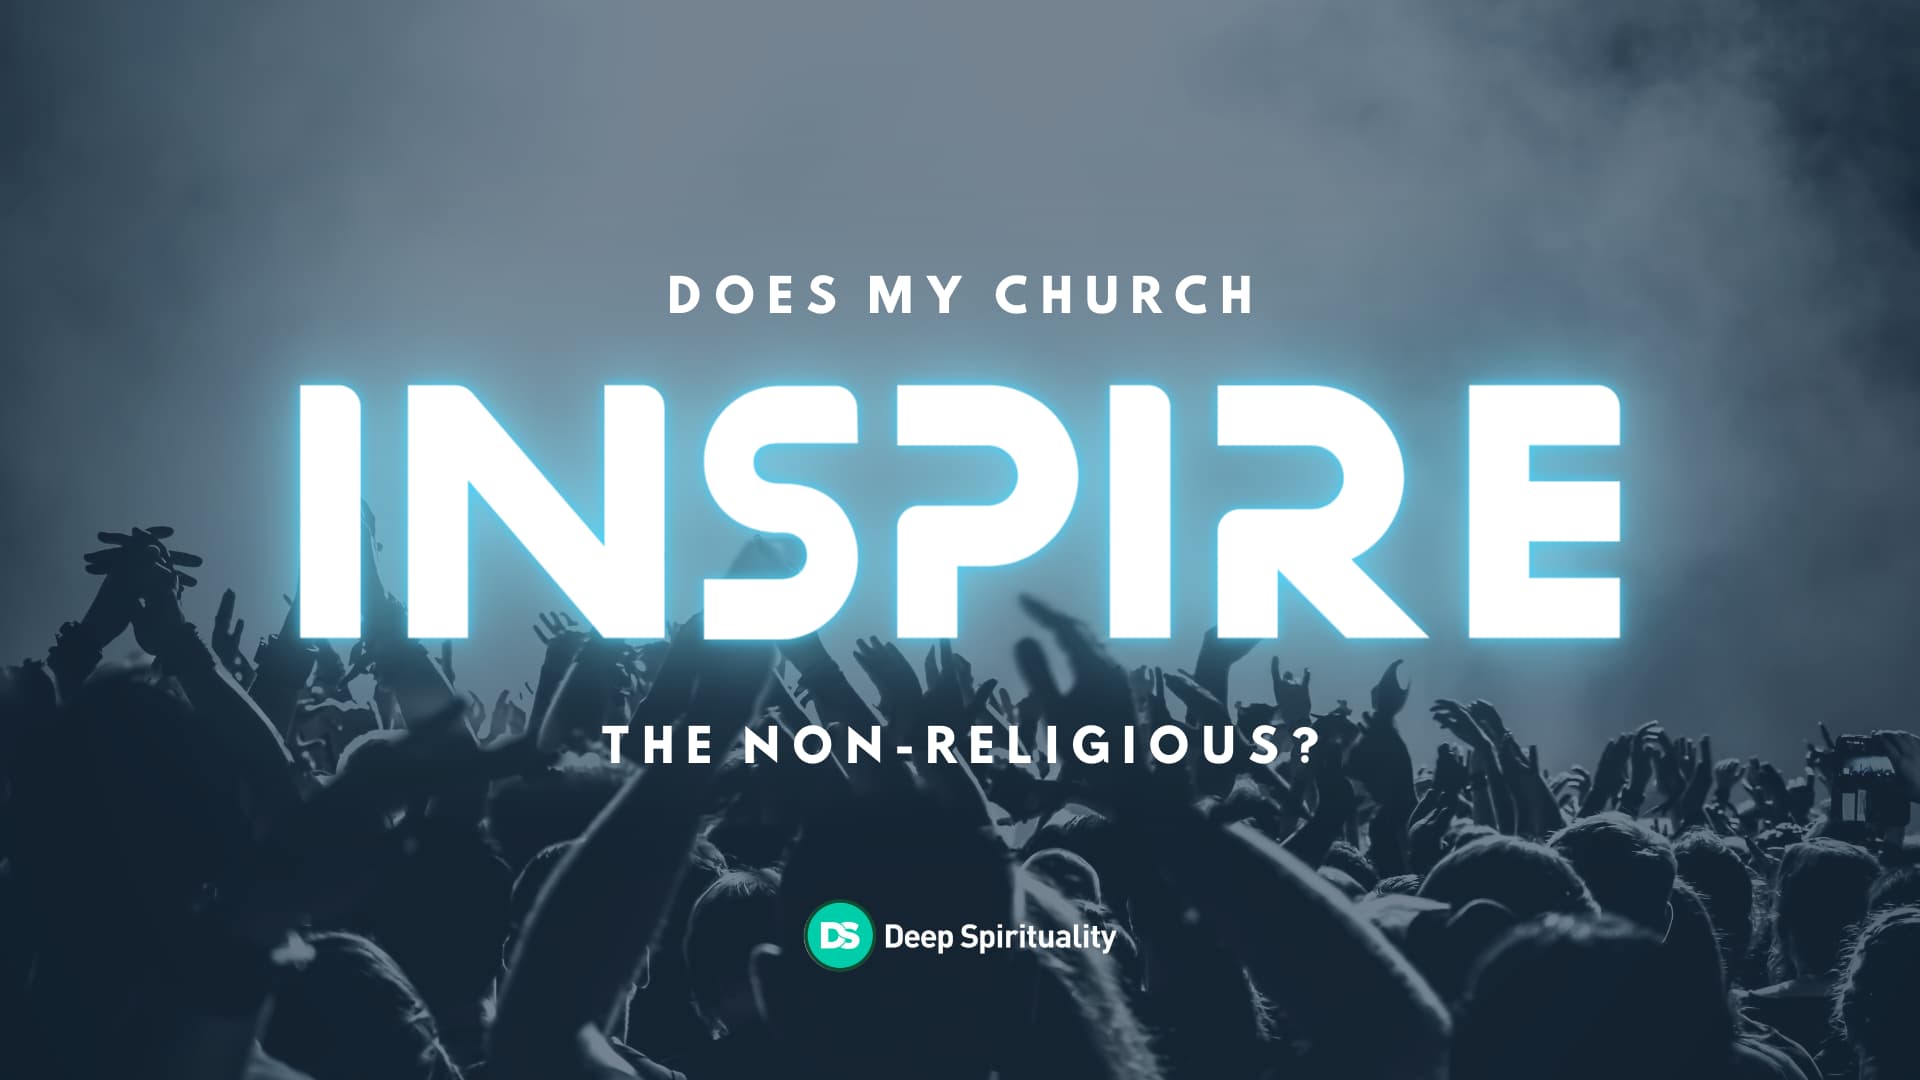 Does My Church Inspire the Non-Religious? 9